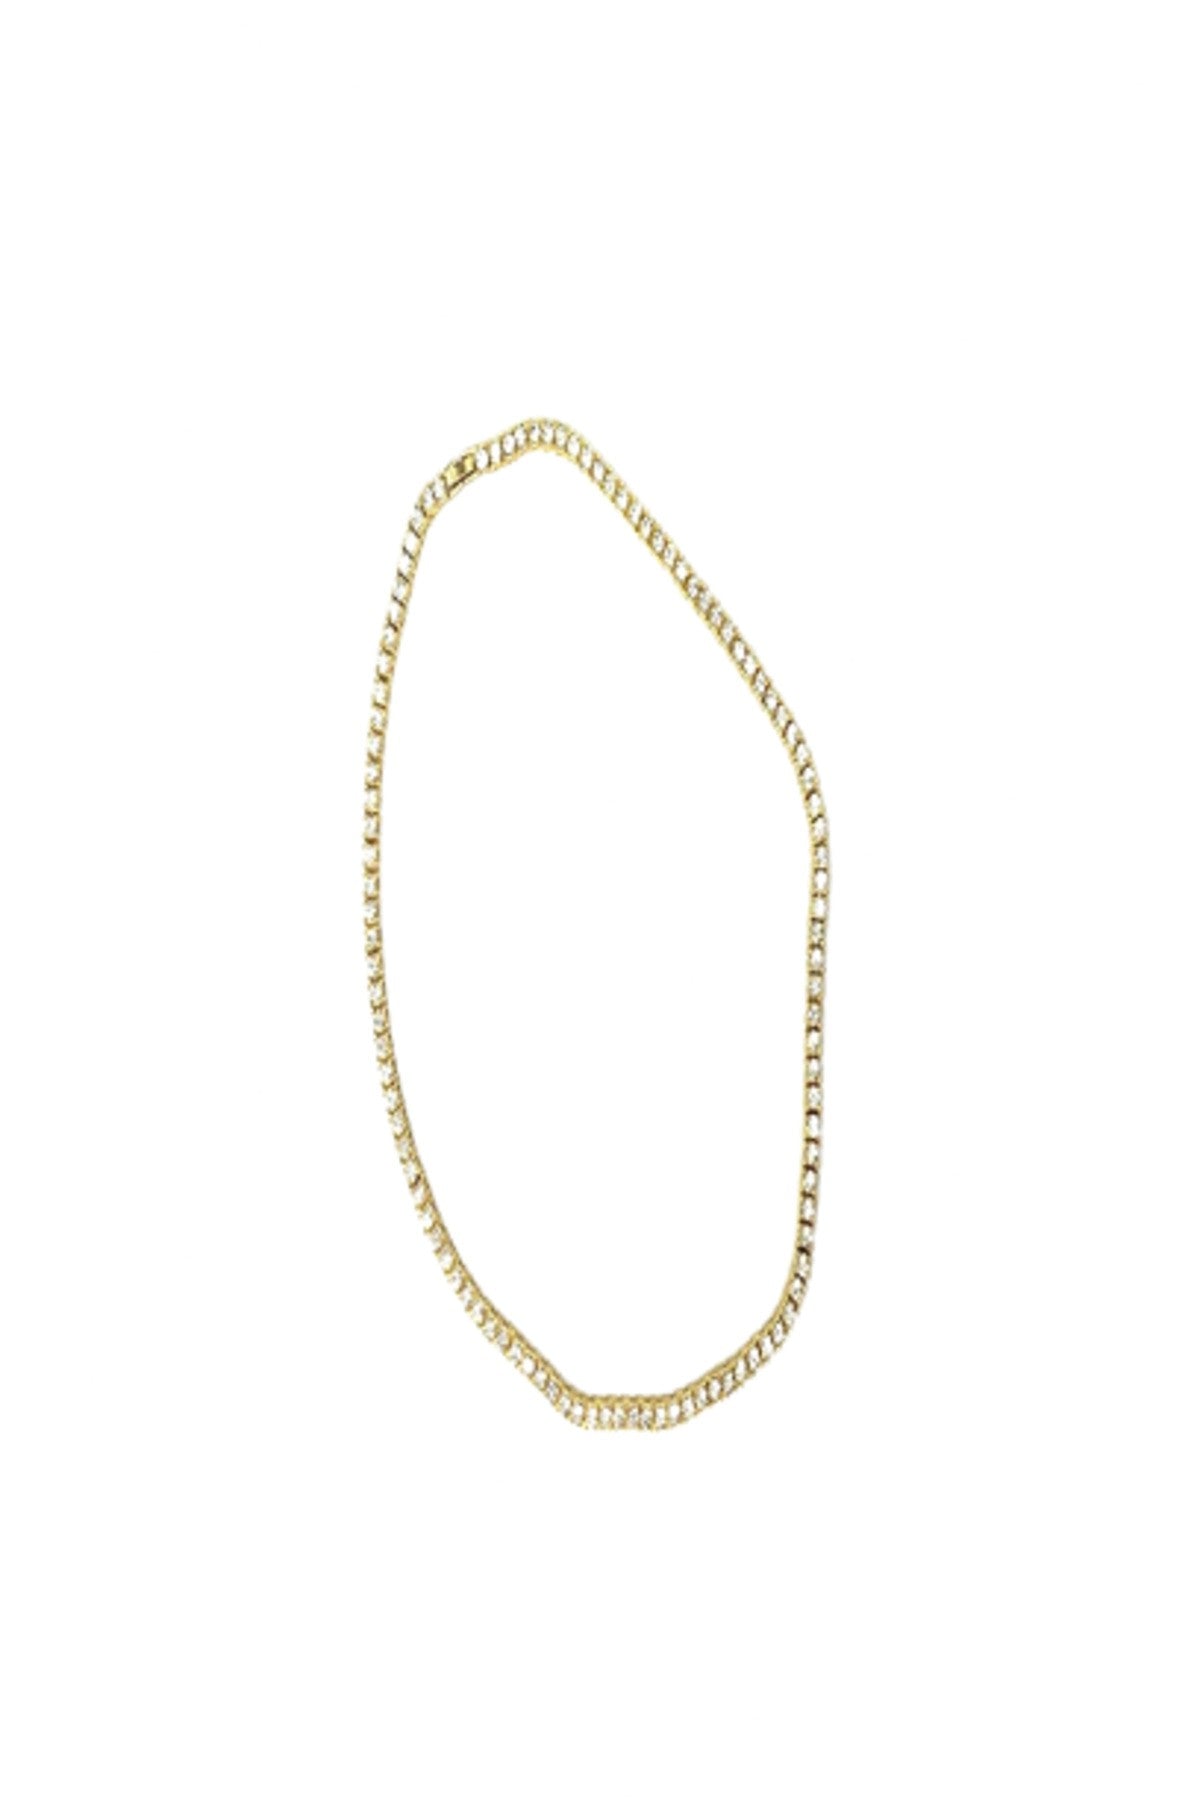 4MM TENNIS HIP HOP CHAIN with Round Stone